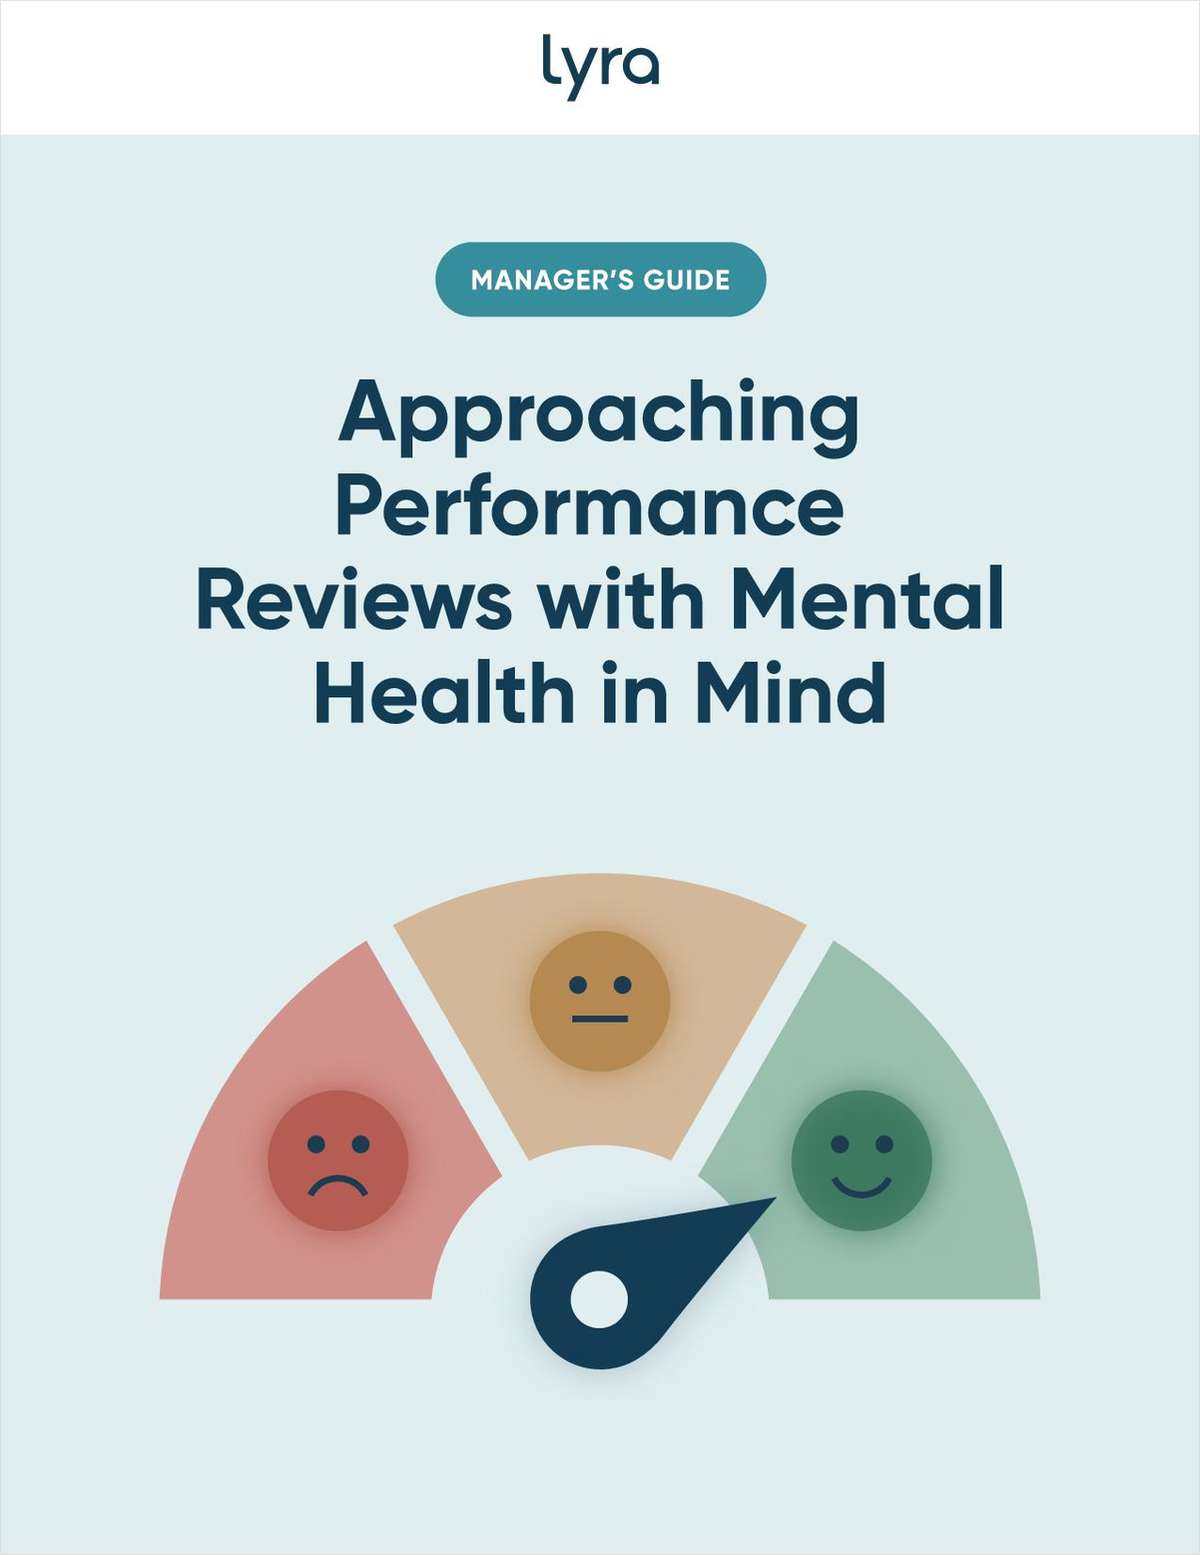 Manager's Guide: Approaching Performance Reviews with Mental Health in Mind